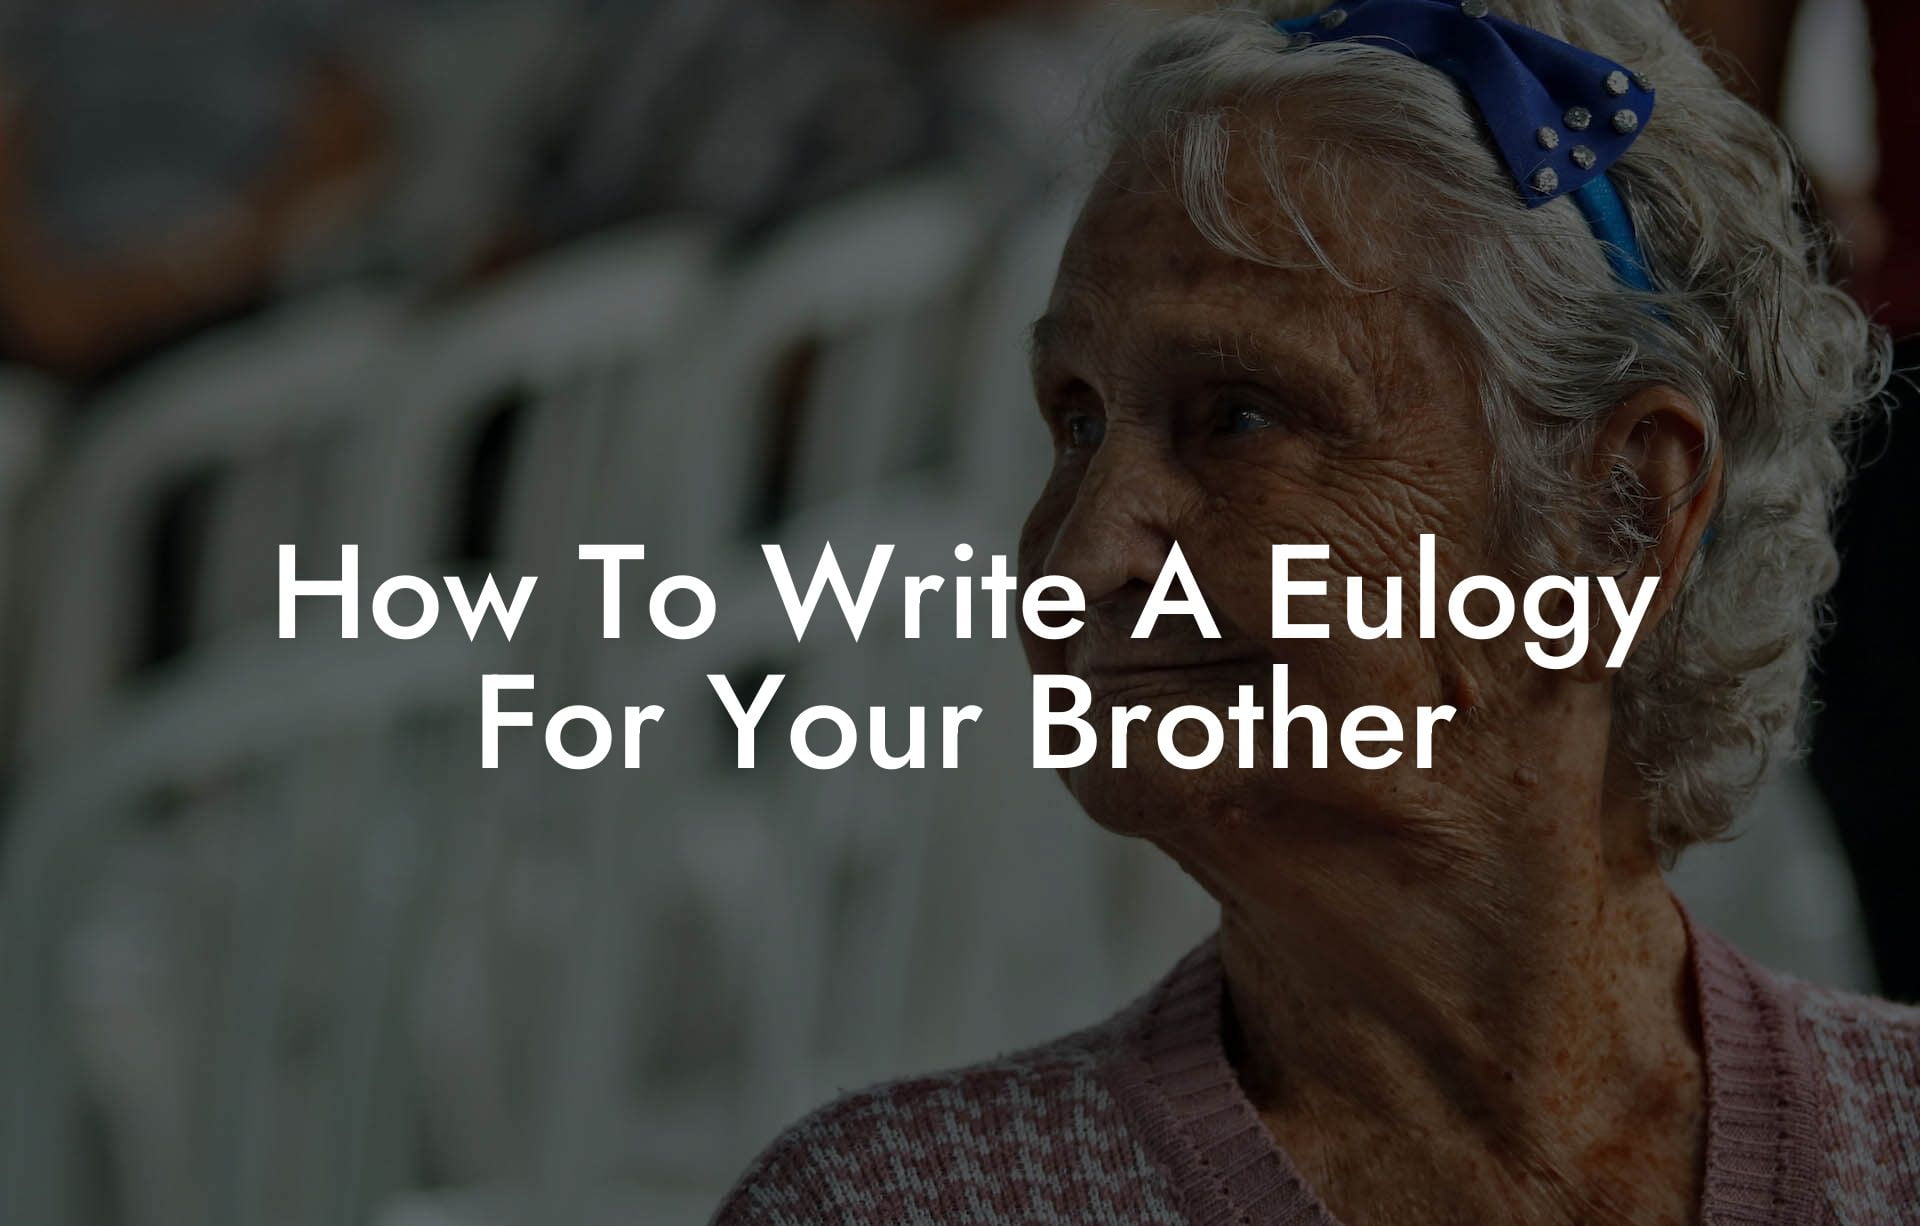 How To Write A Eulogy For Your Brother